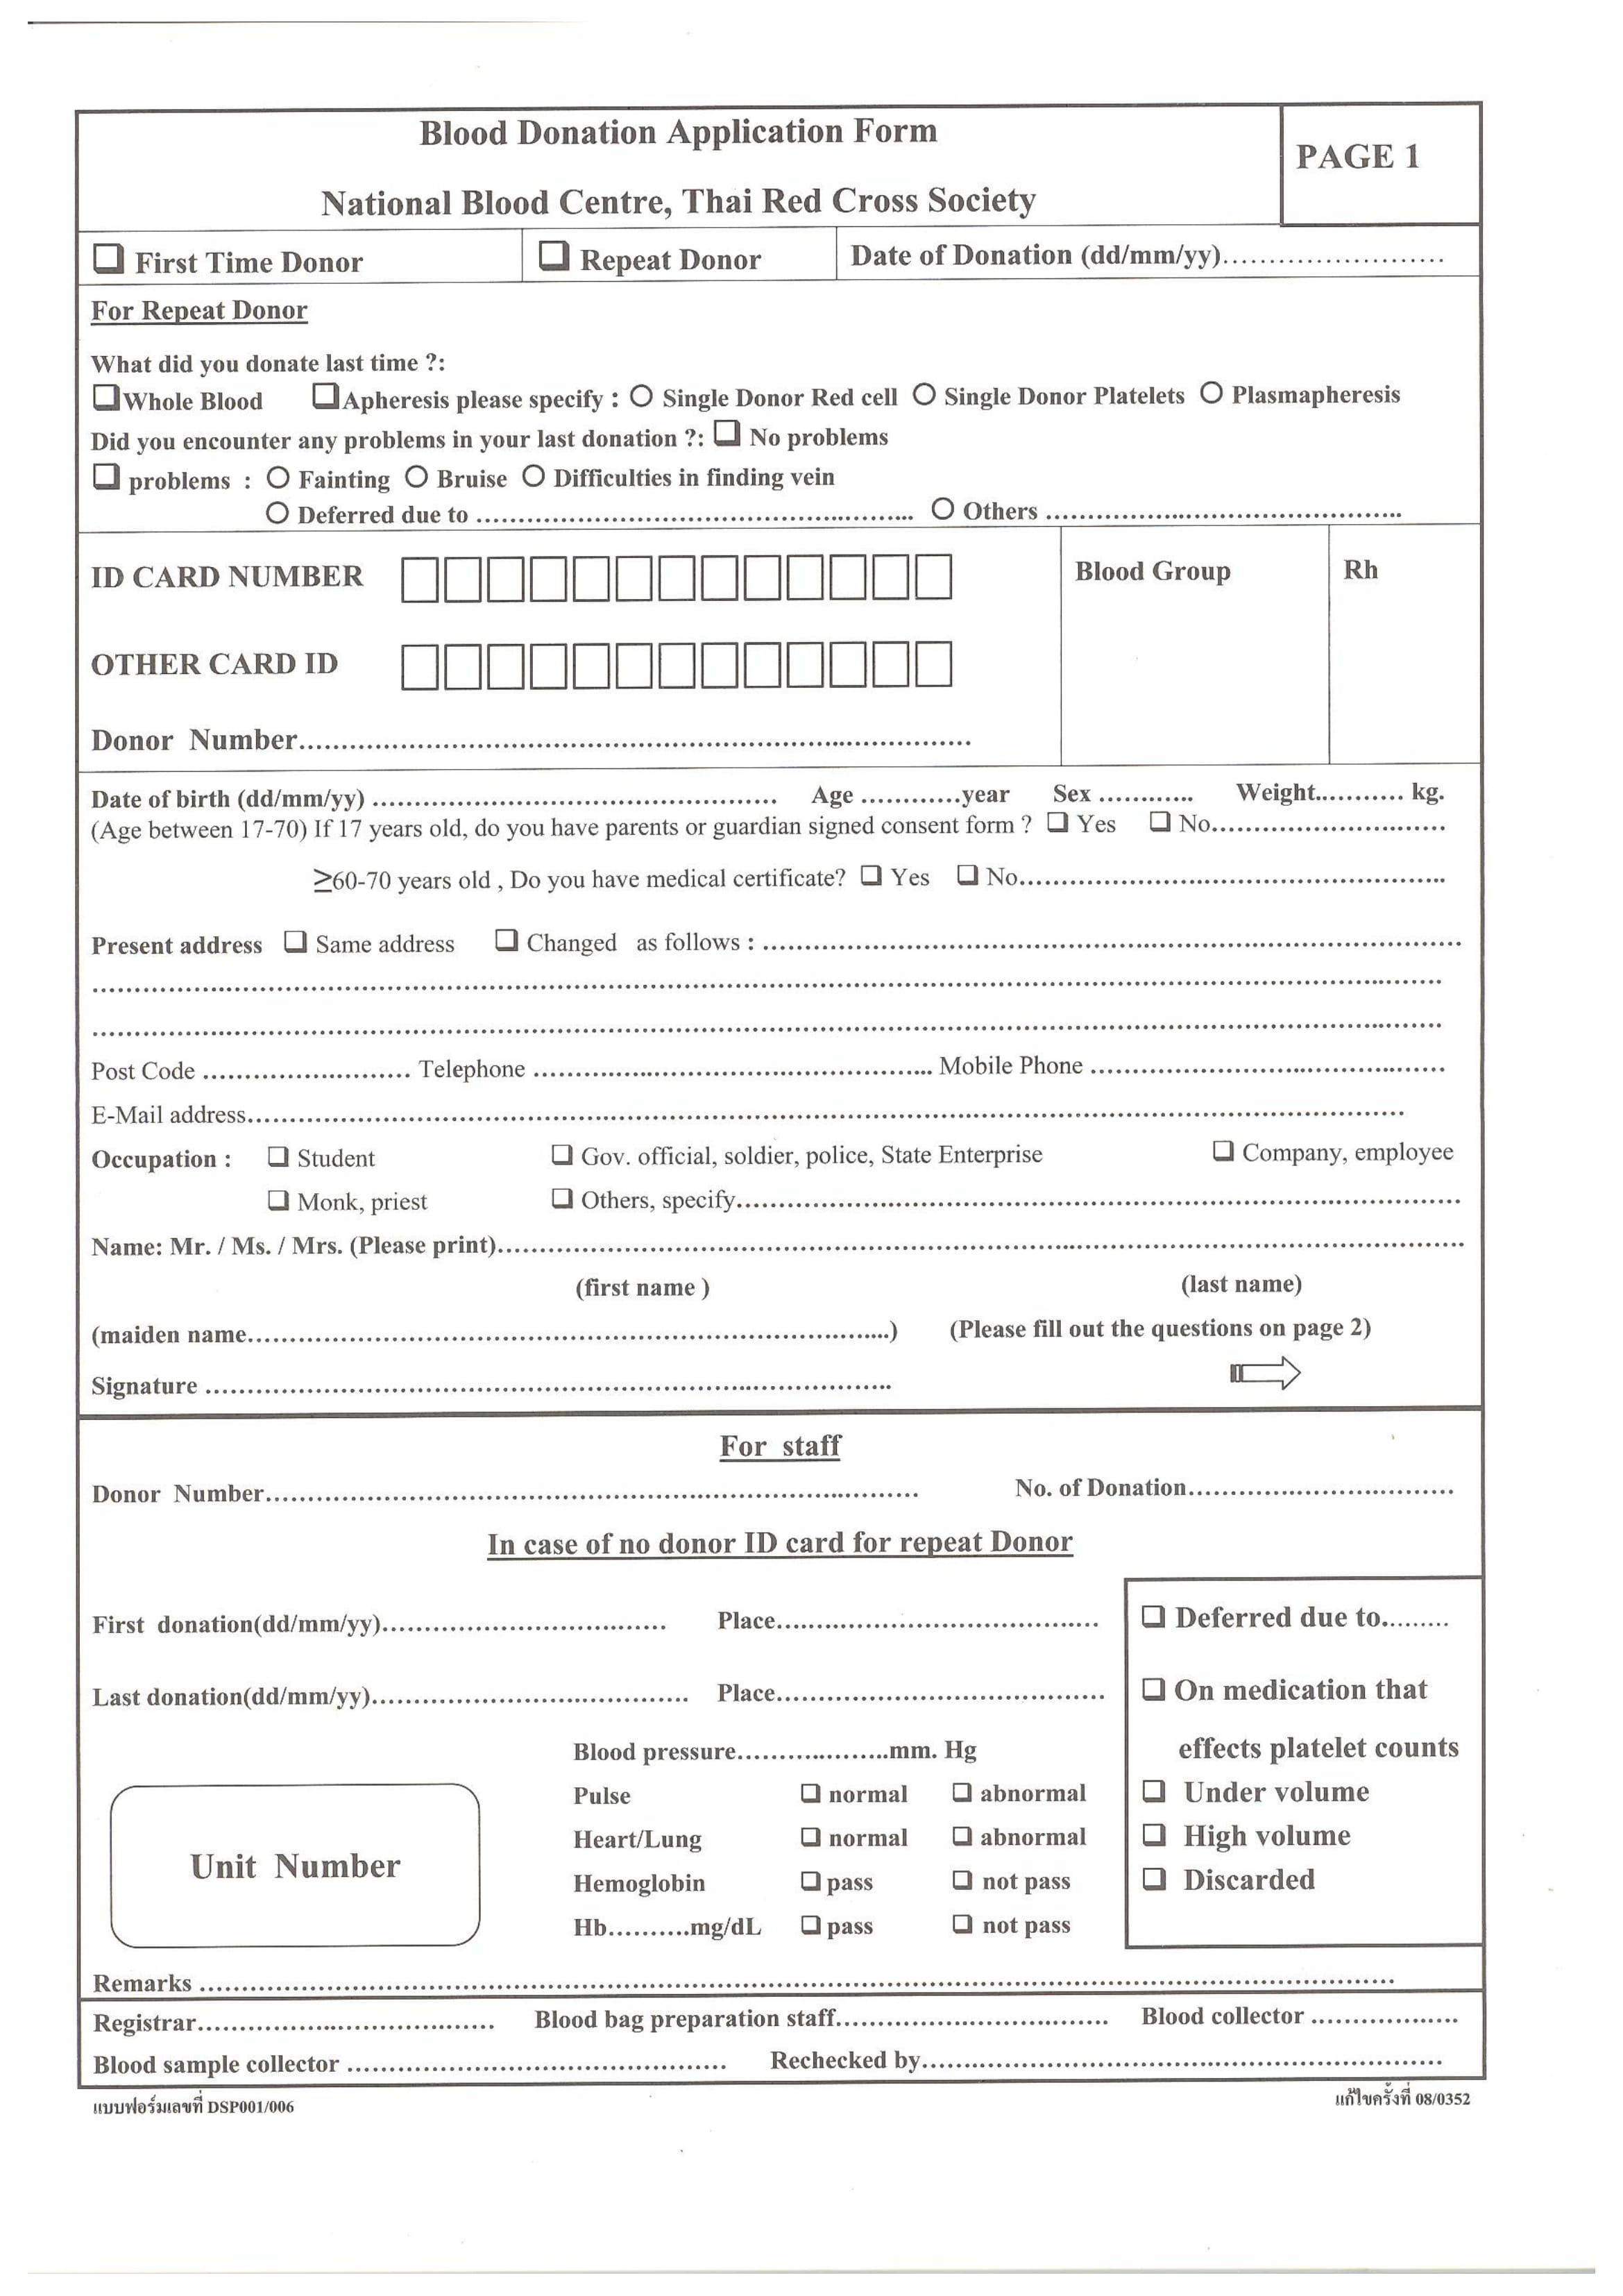 blood donation application form 1